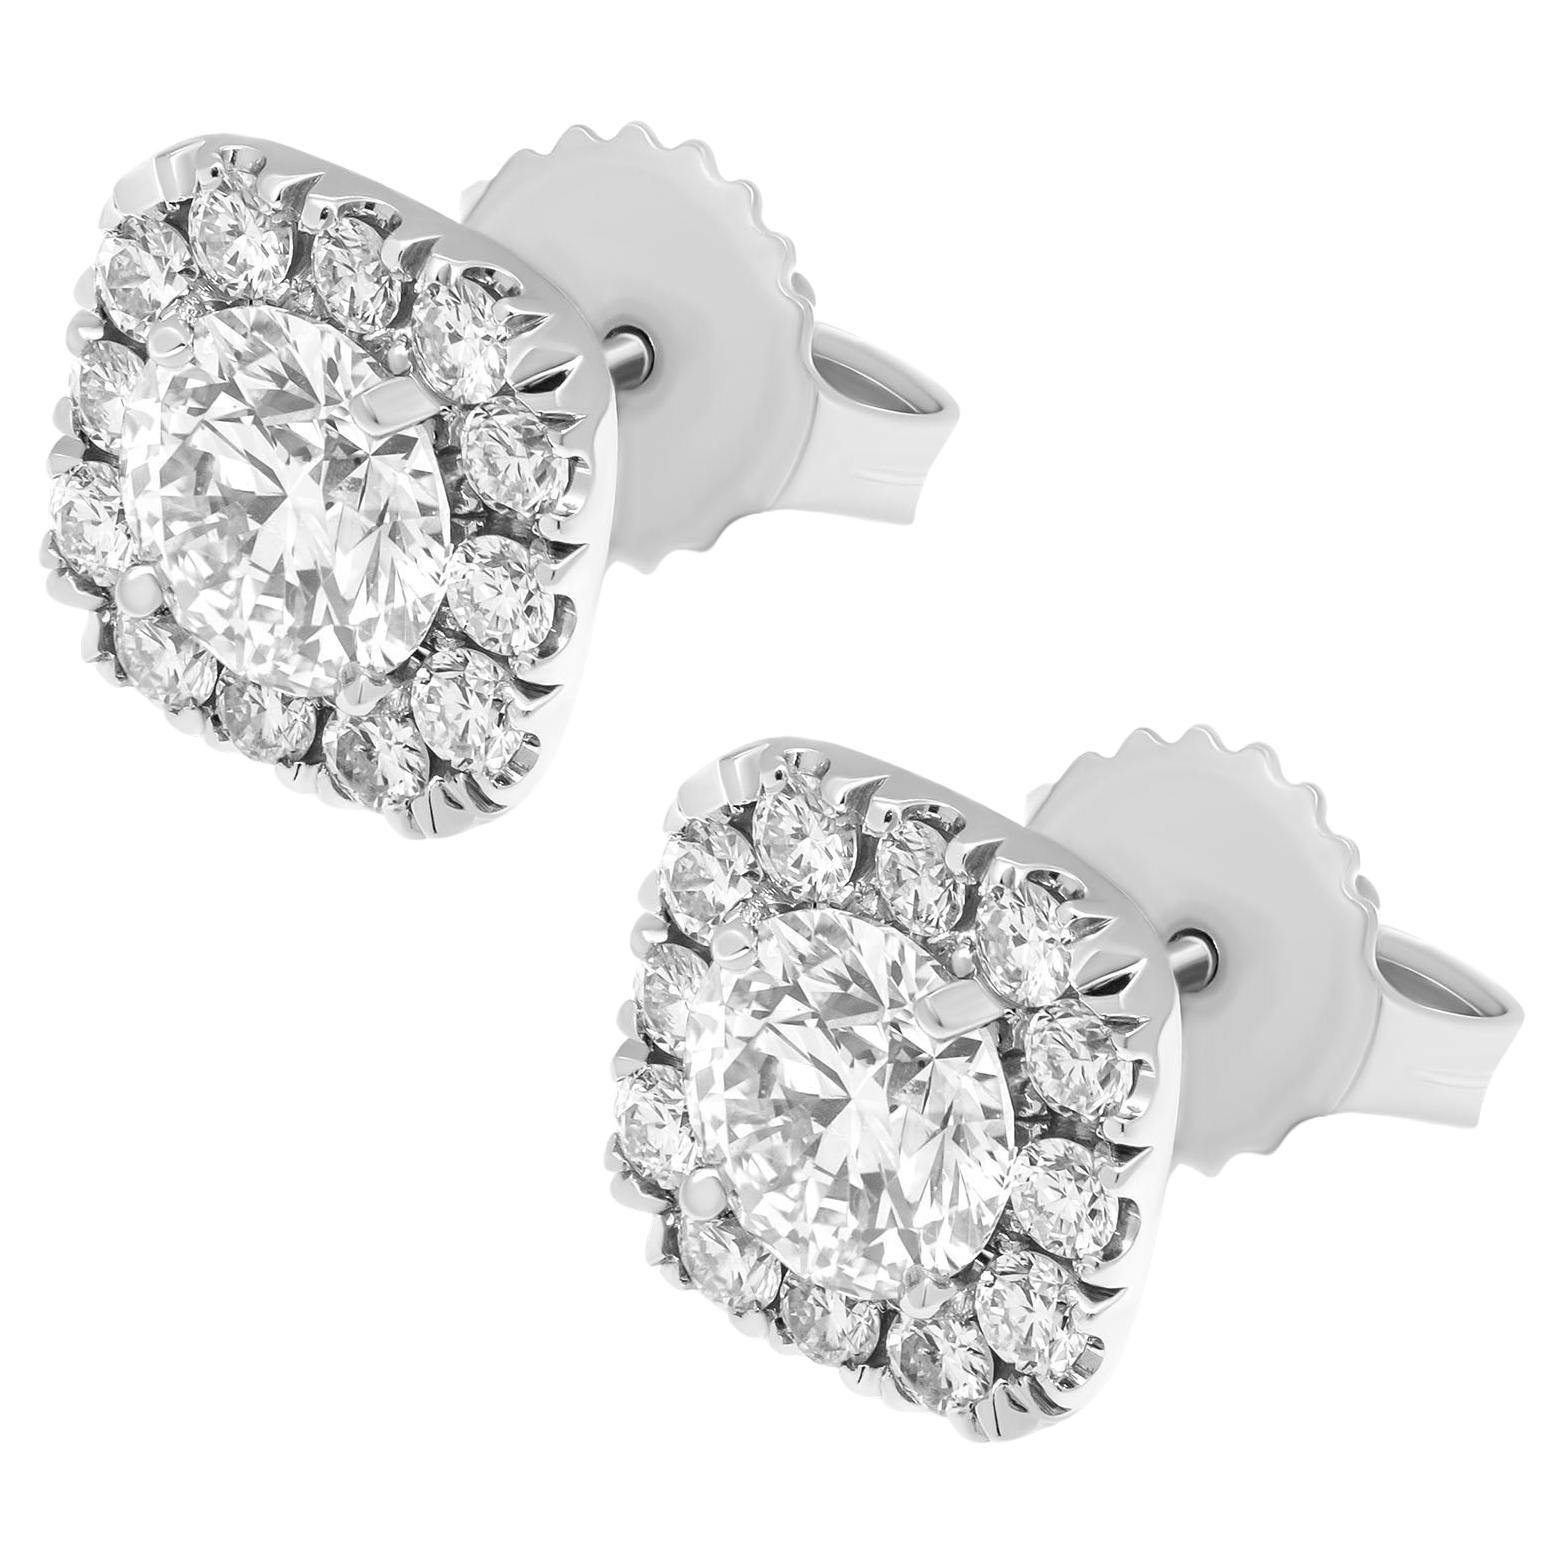 Cushion Halo Stud Earrings with Round Stones in Platinum